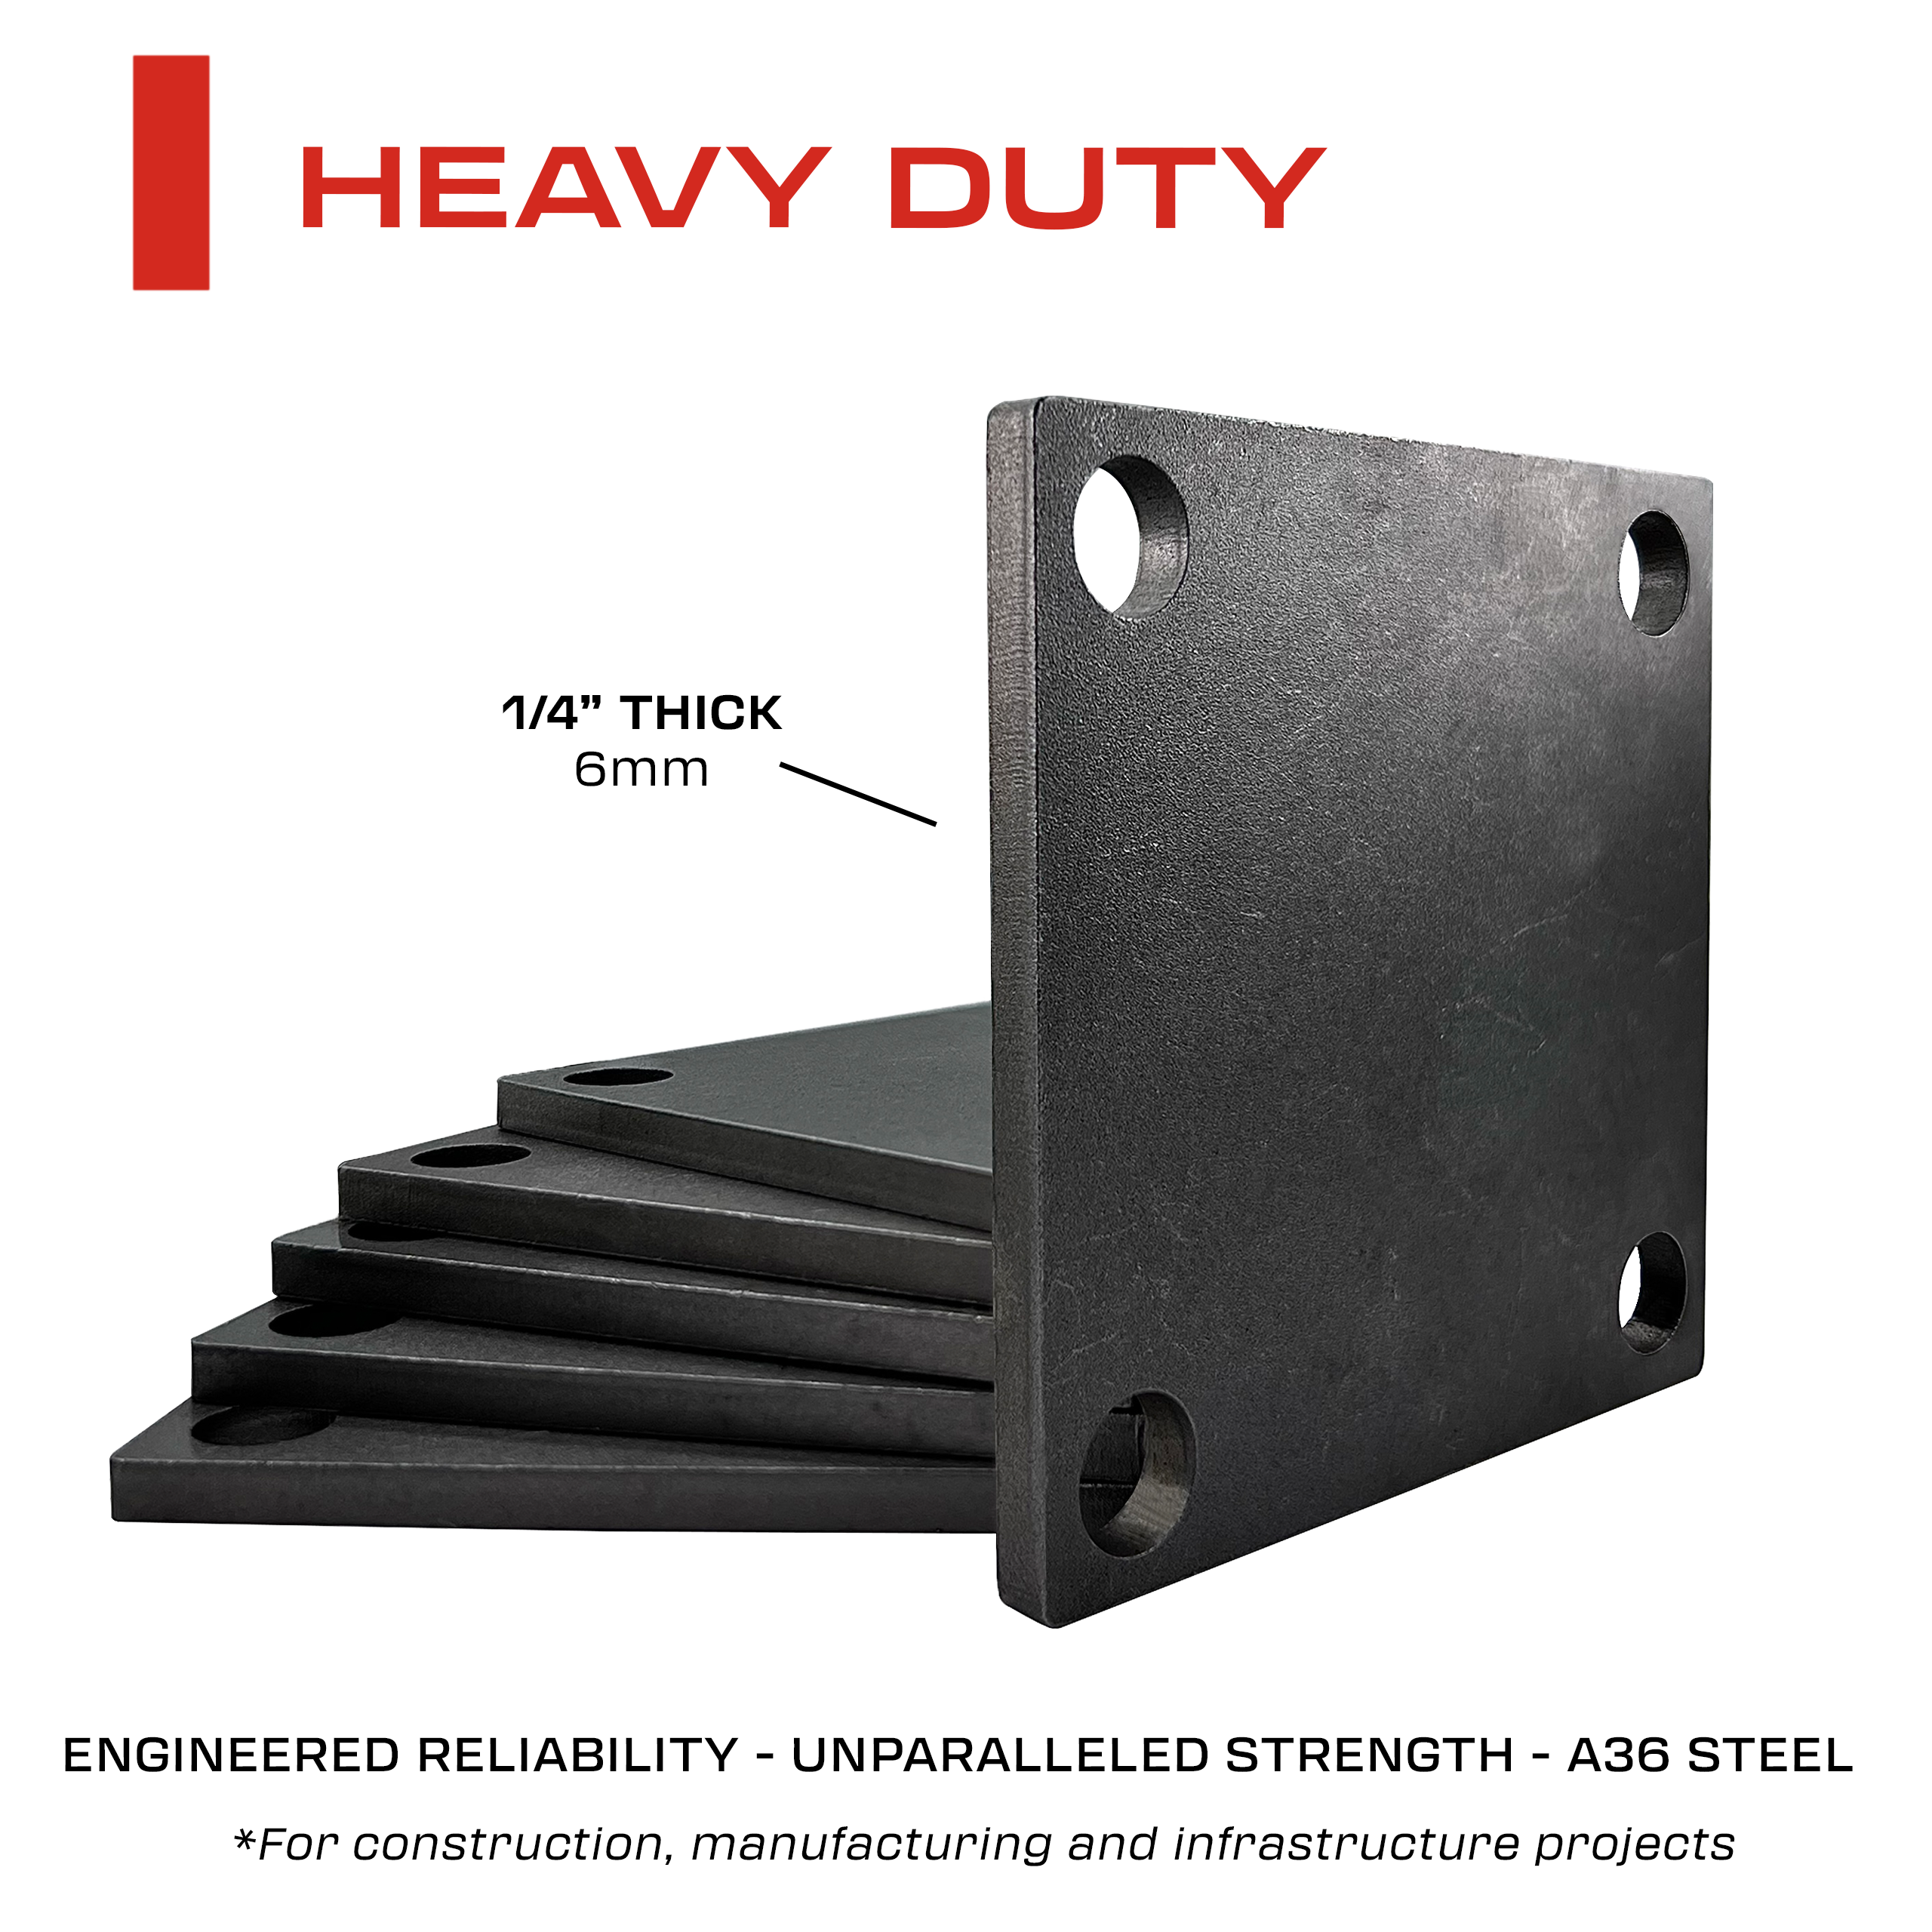 4x4" Square Steel Metal Baseplate 1/4" Thick 6mm - Laser Cut – A36 Heavy Duty Carbon Steel